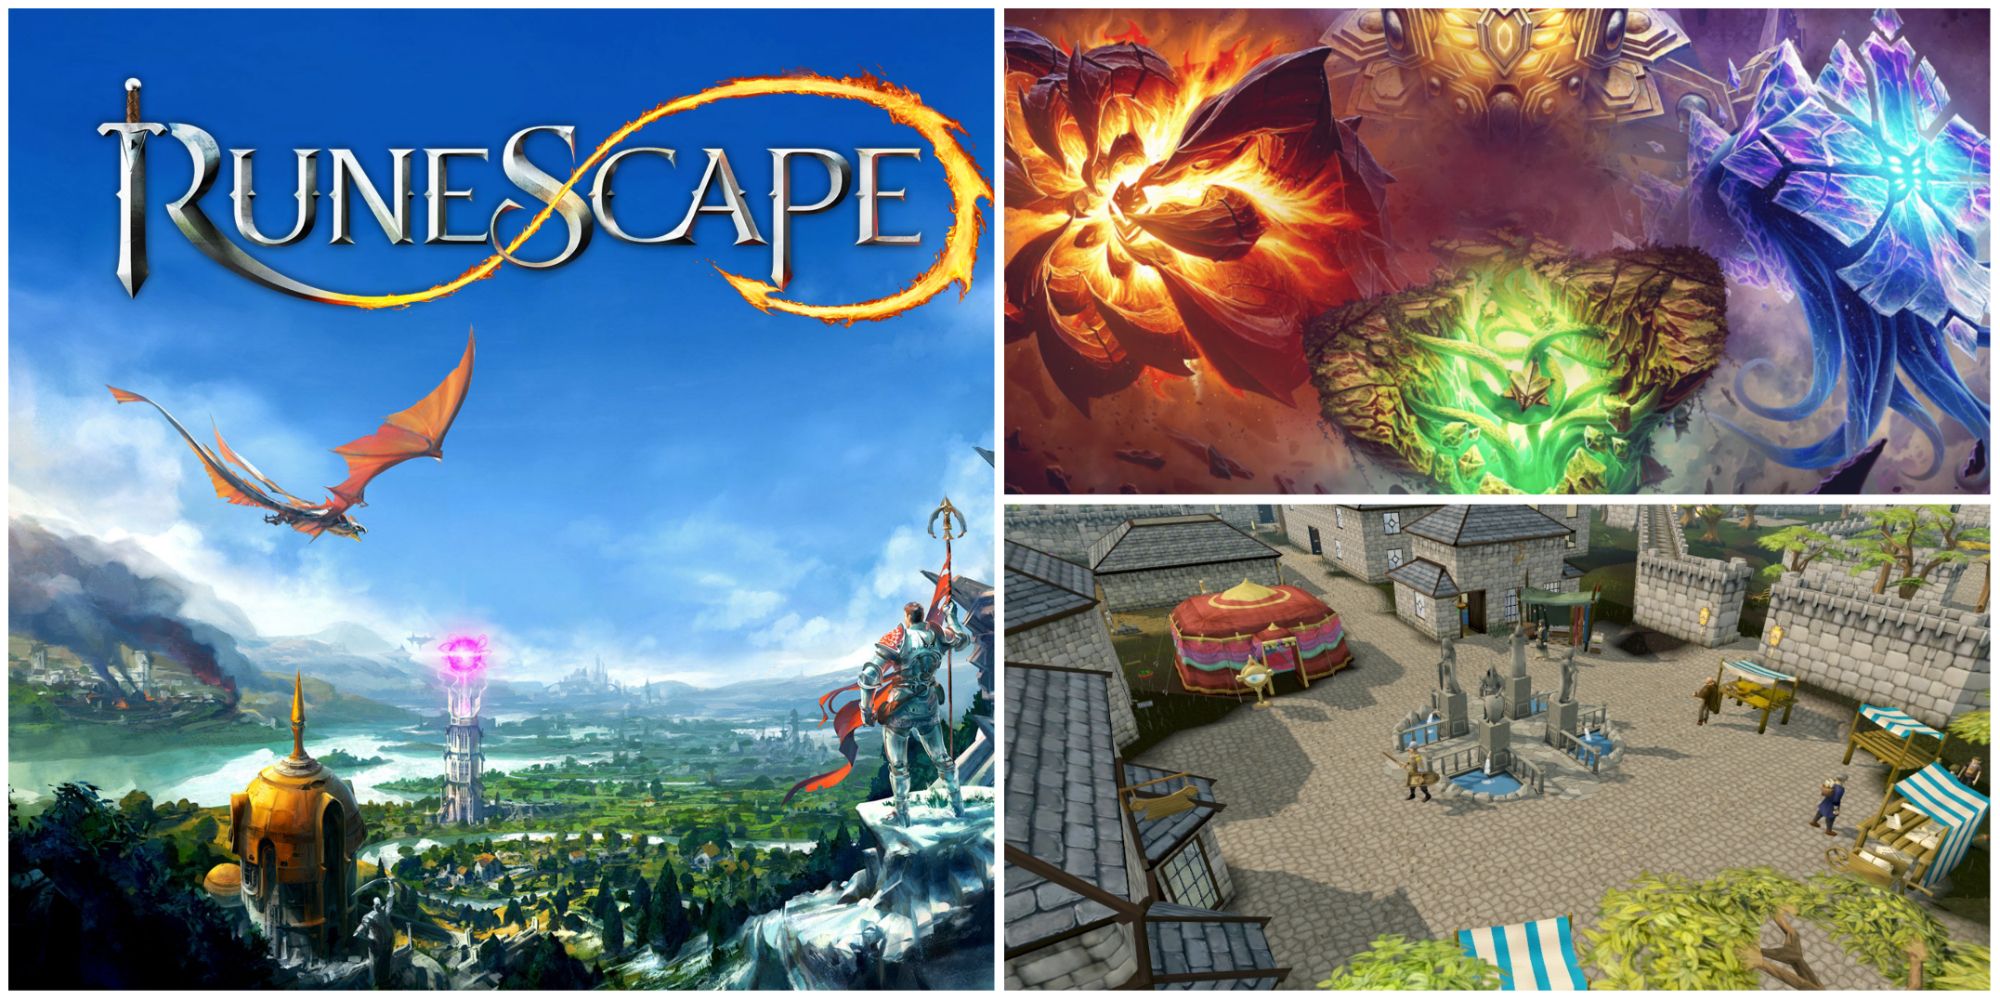 RuneScape 3 title and art